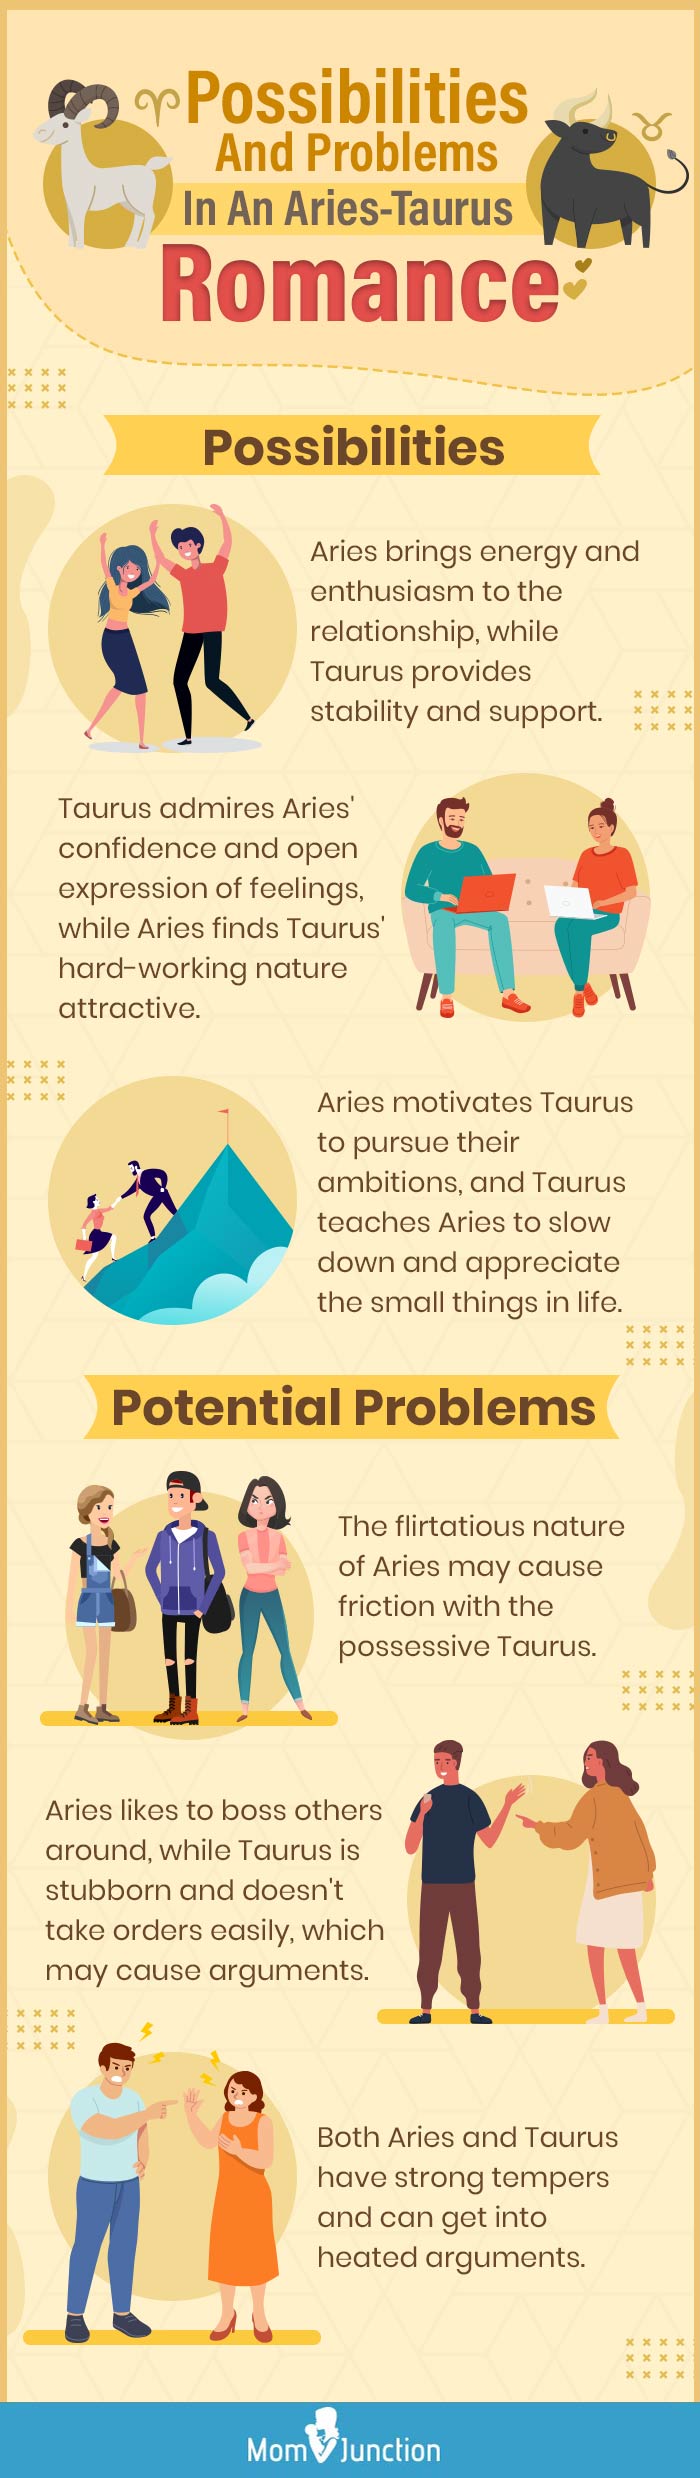 possibilities and problems in an aries taurus romance (infographic)